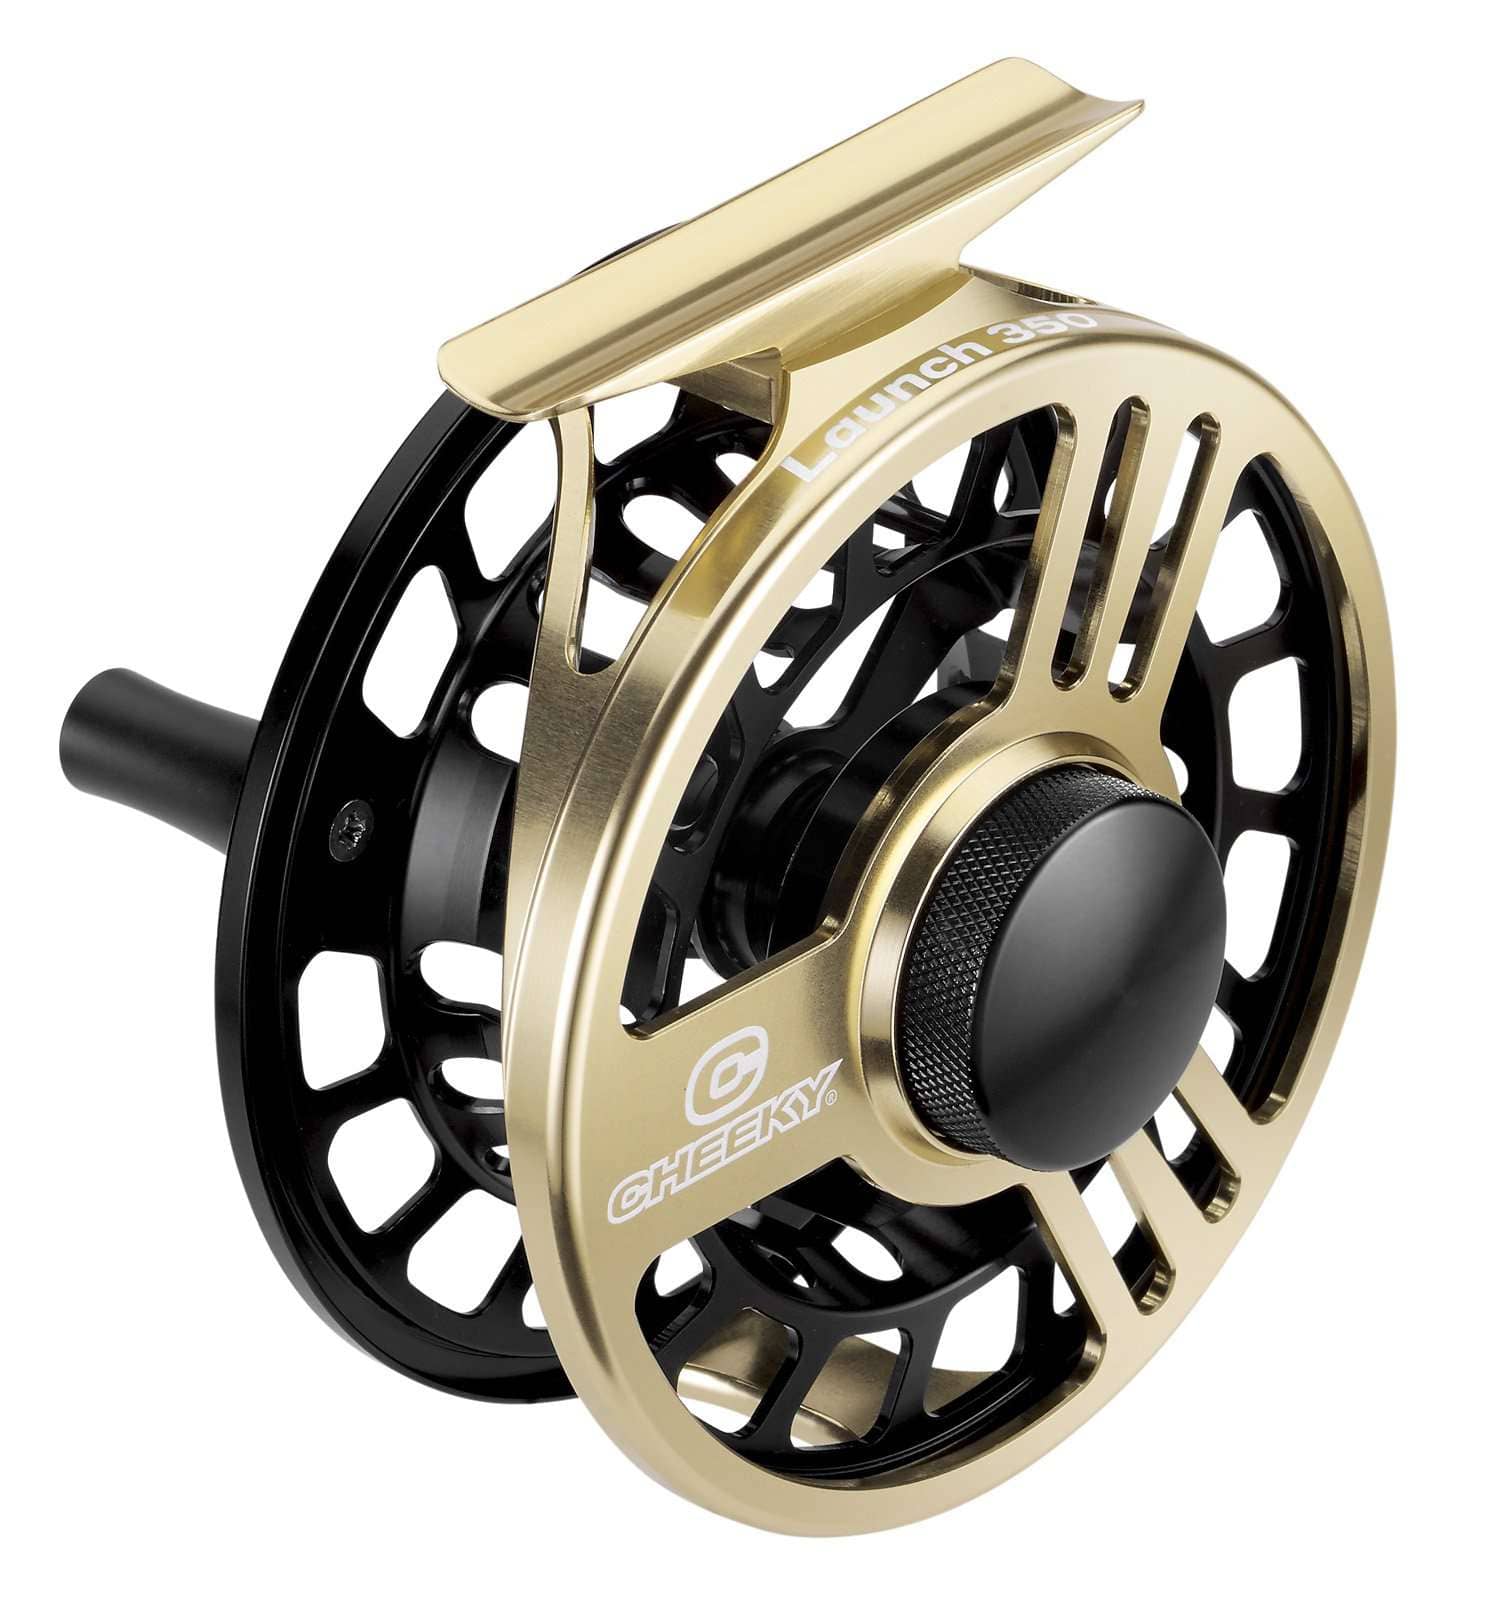 Introducing The Launch Series, At Cheeky Fishing, we are obsessed with  designing the highest performing reels on the planet. That's why we spent  18 months testing and developing the